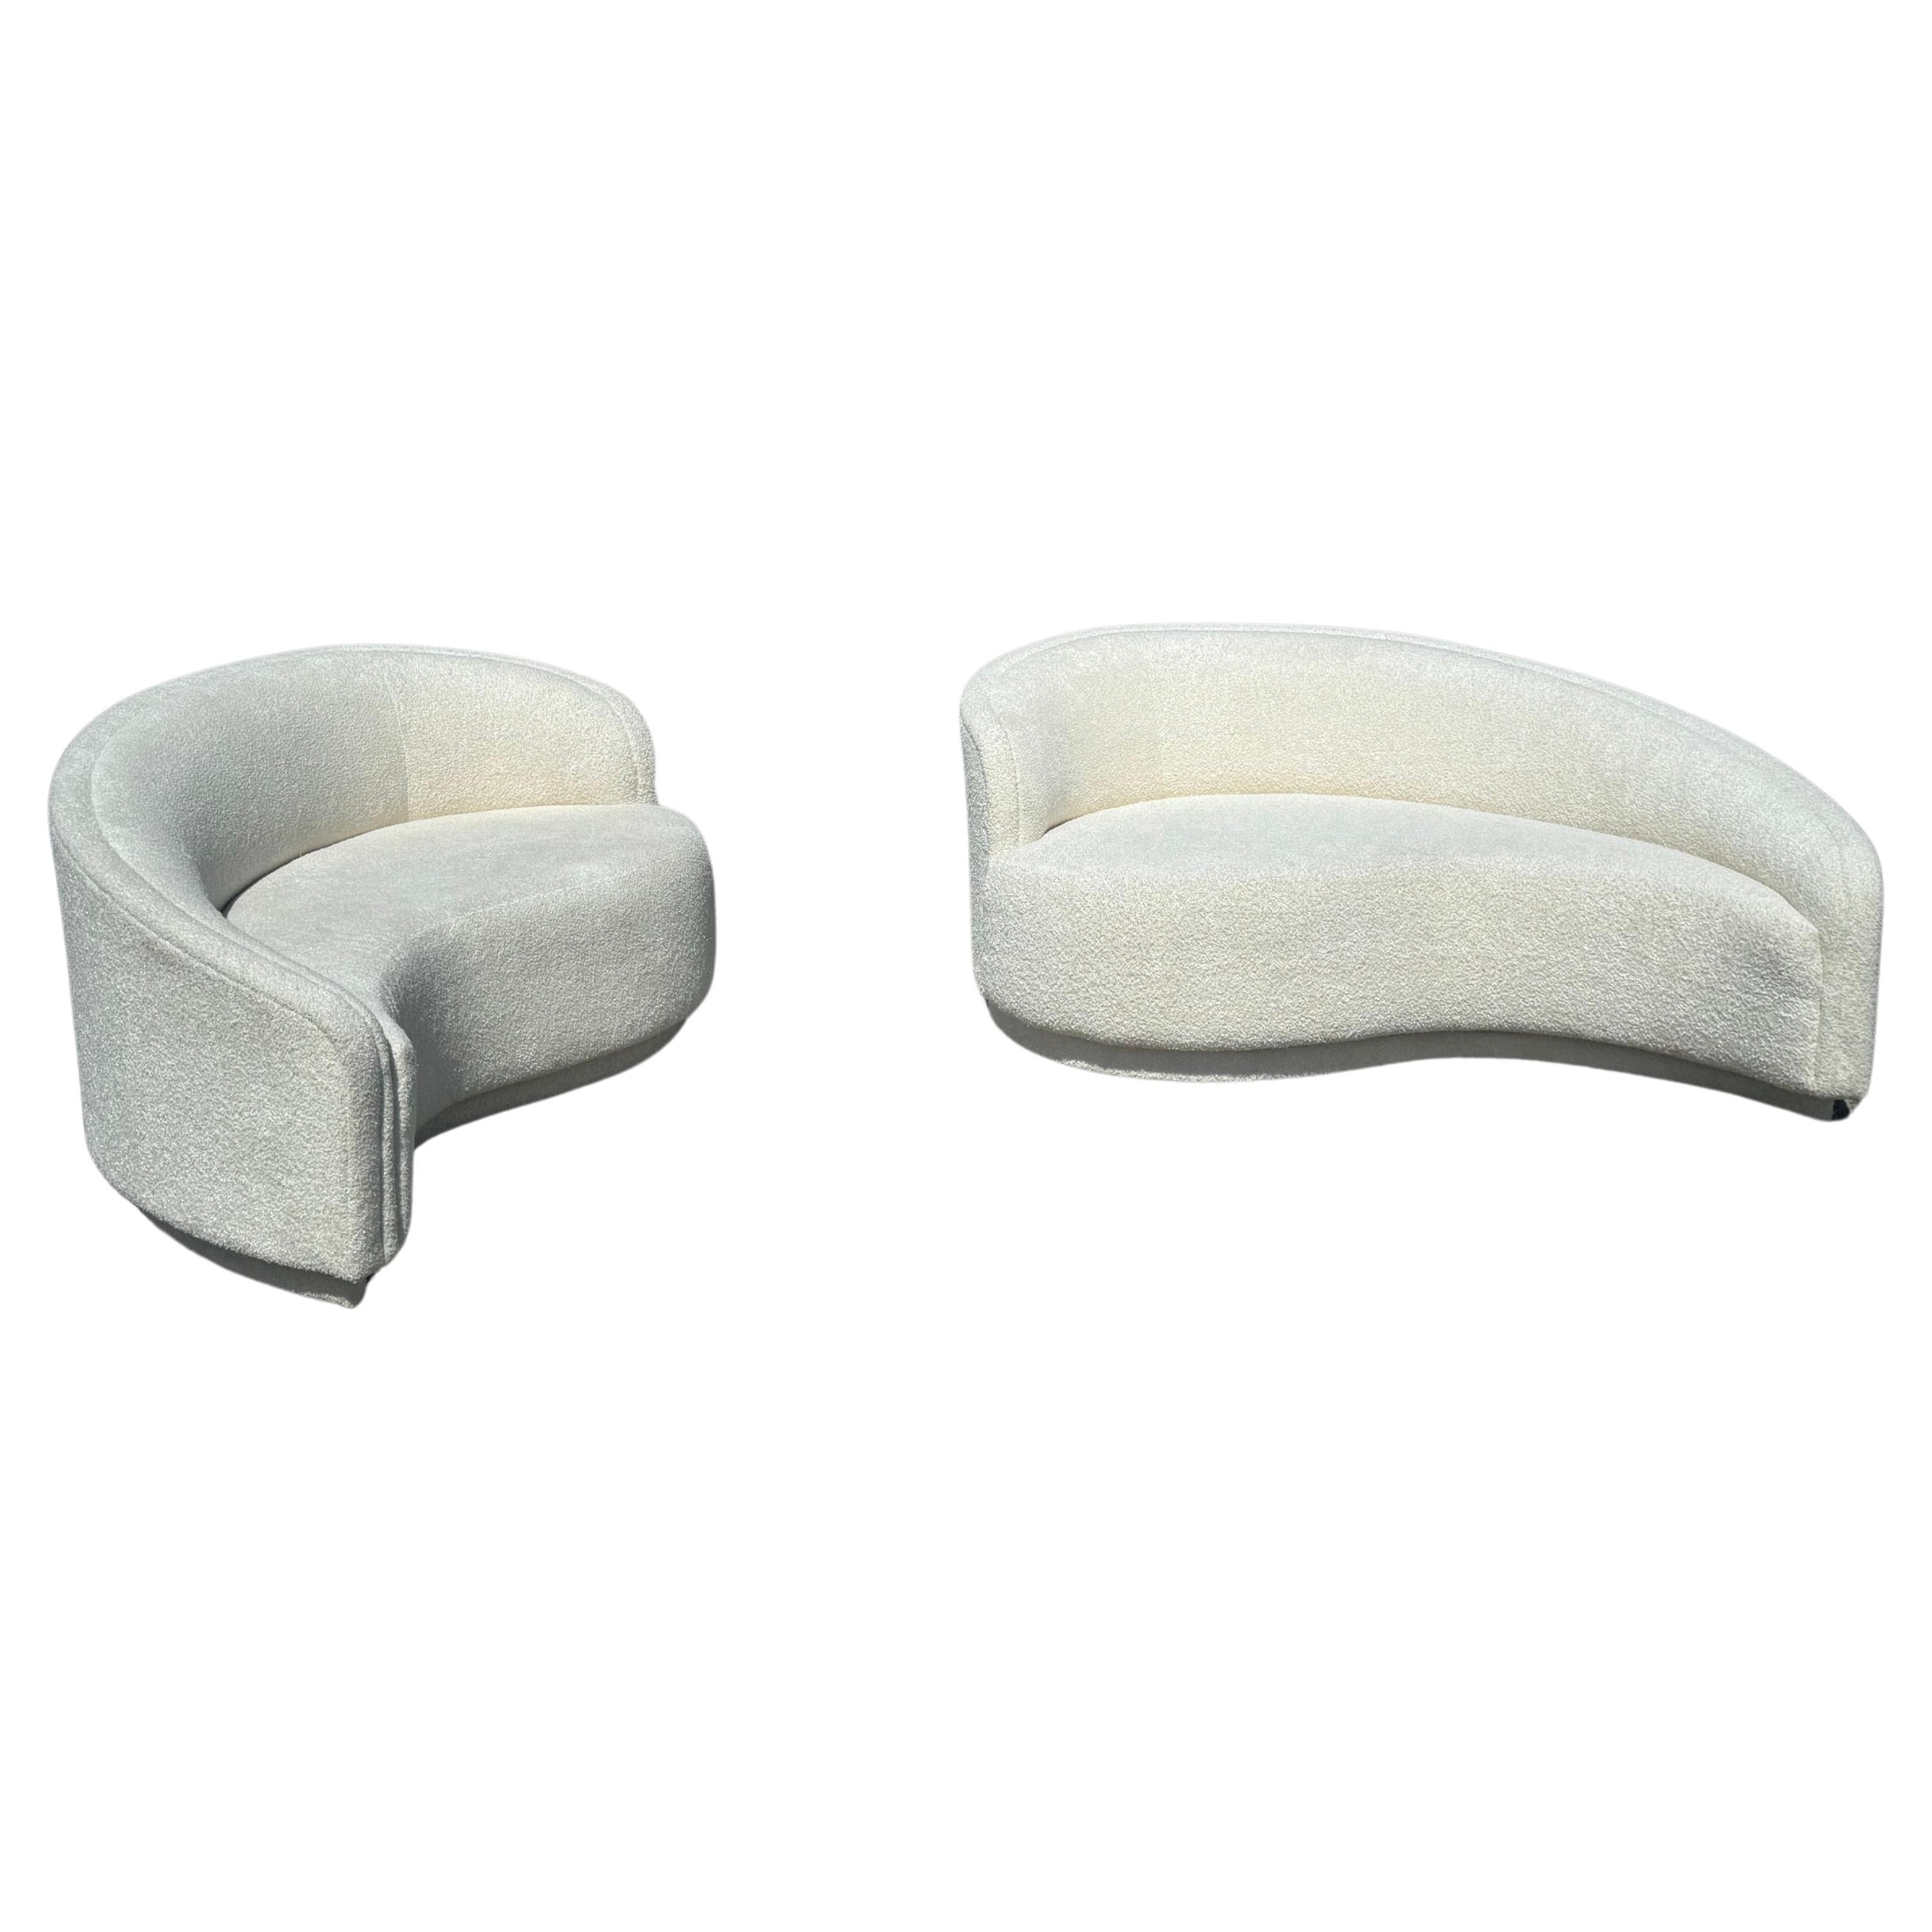 1980s Glamours Curved Sofa - Chaise by Vladimir Kagan for Weiman in White Bouclé